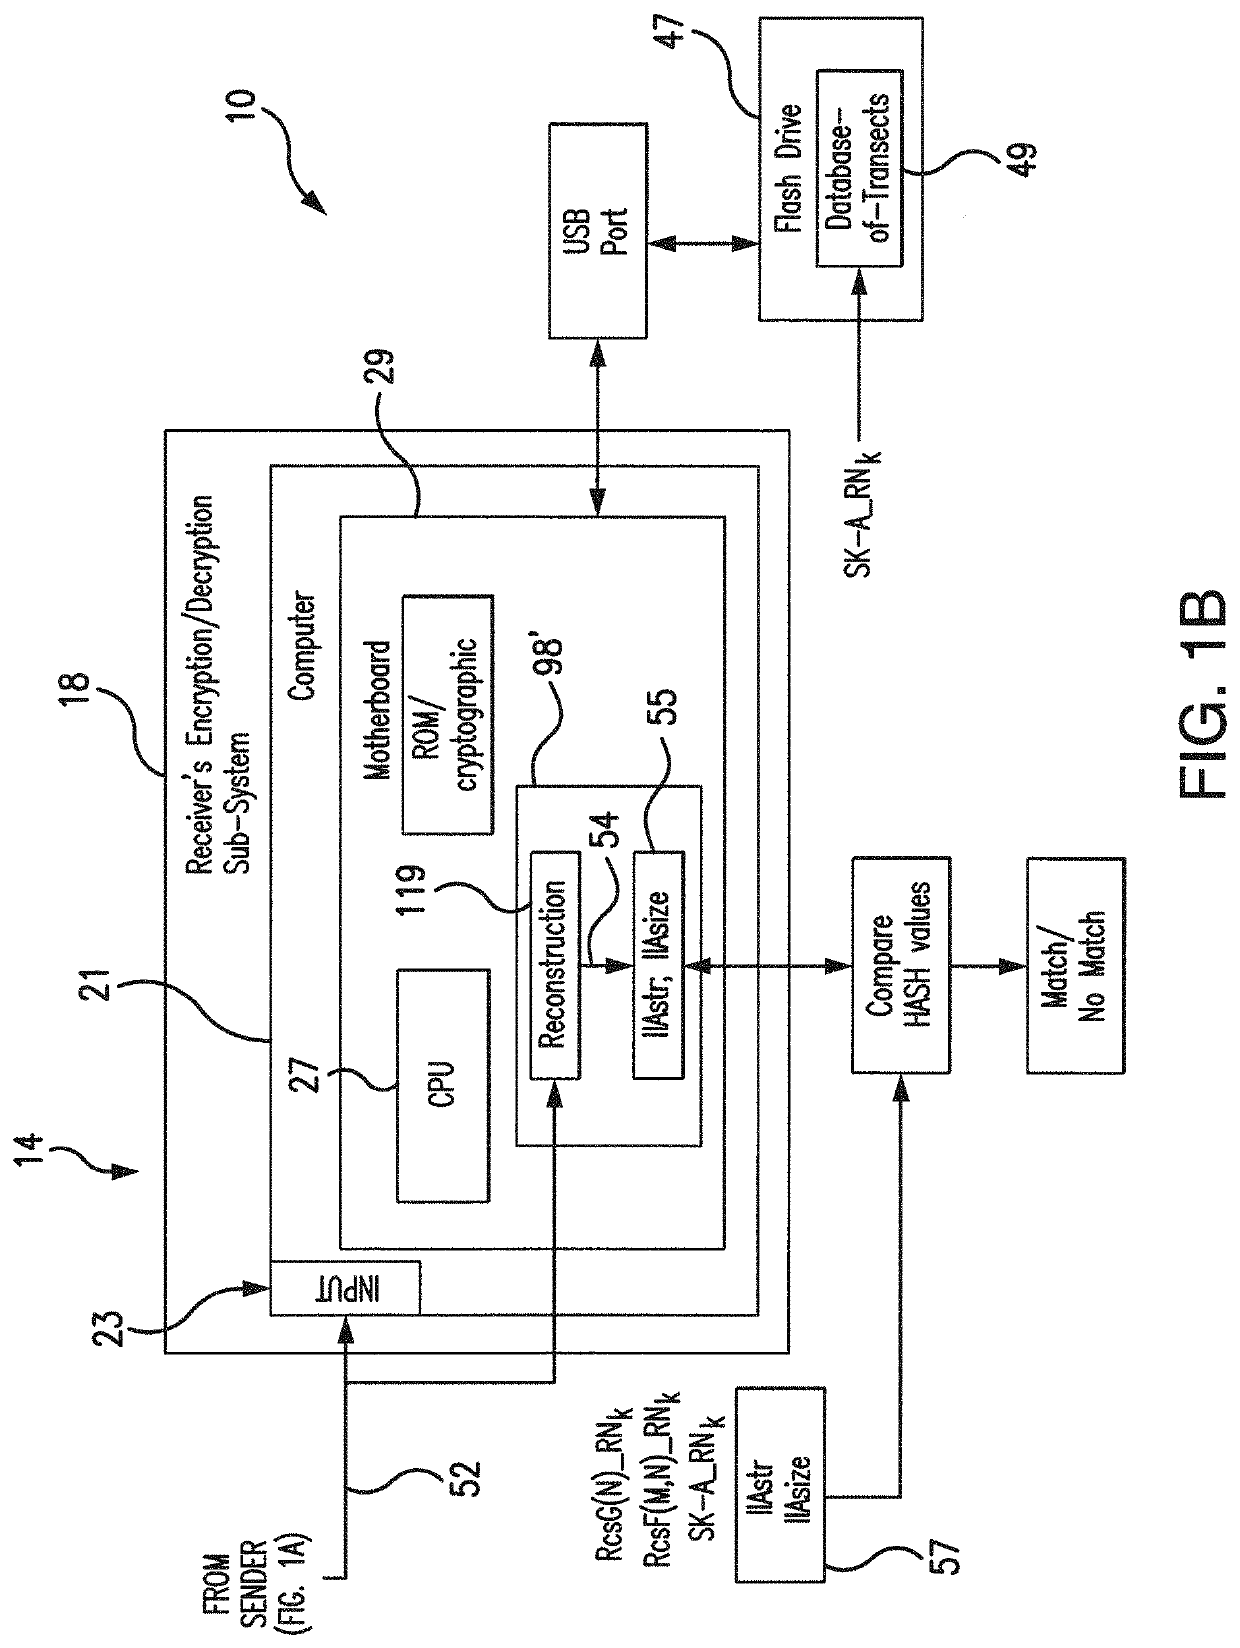 System and method for encryption/decryption of 2-D and 3-D arbitrary images